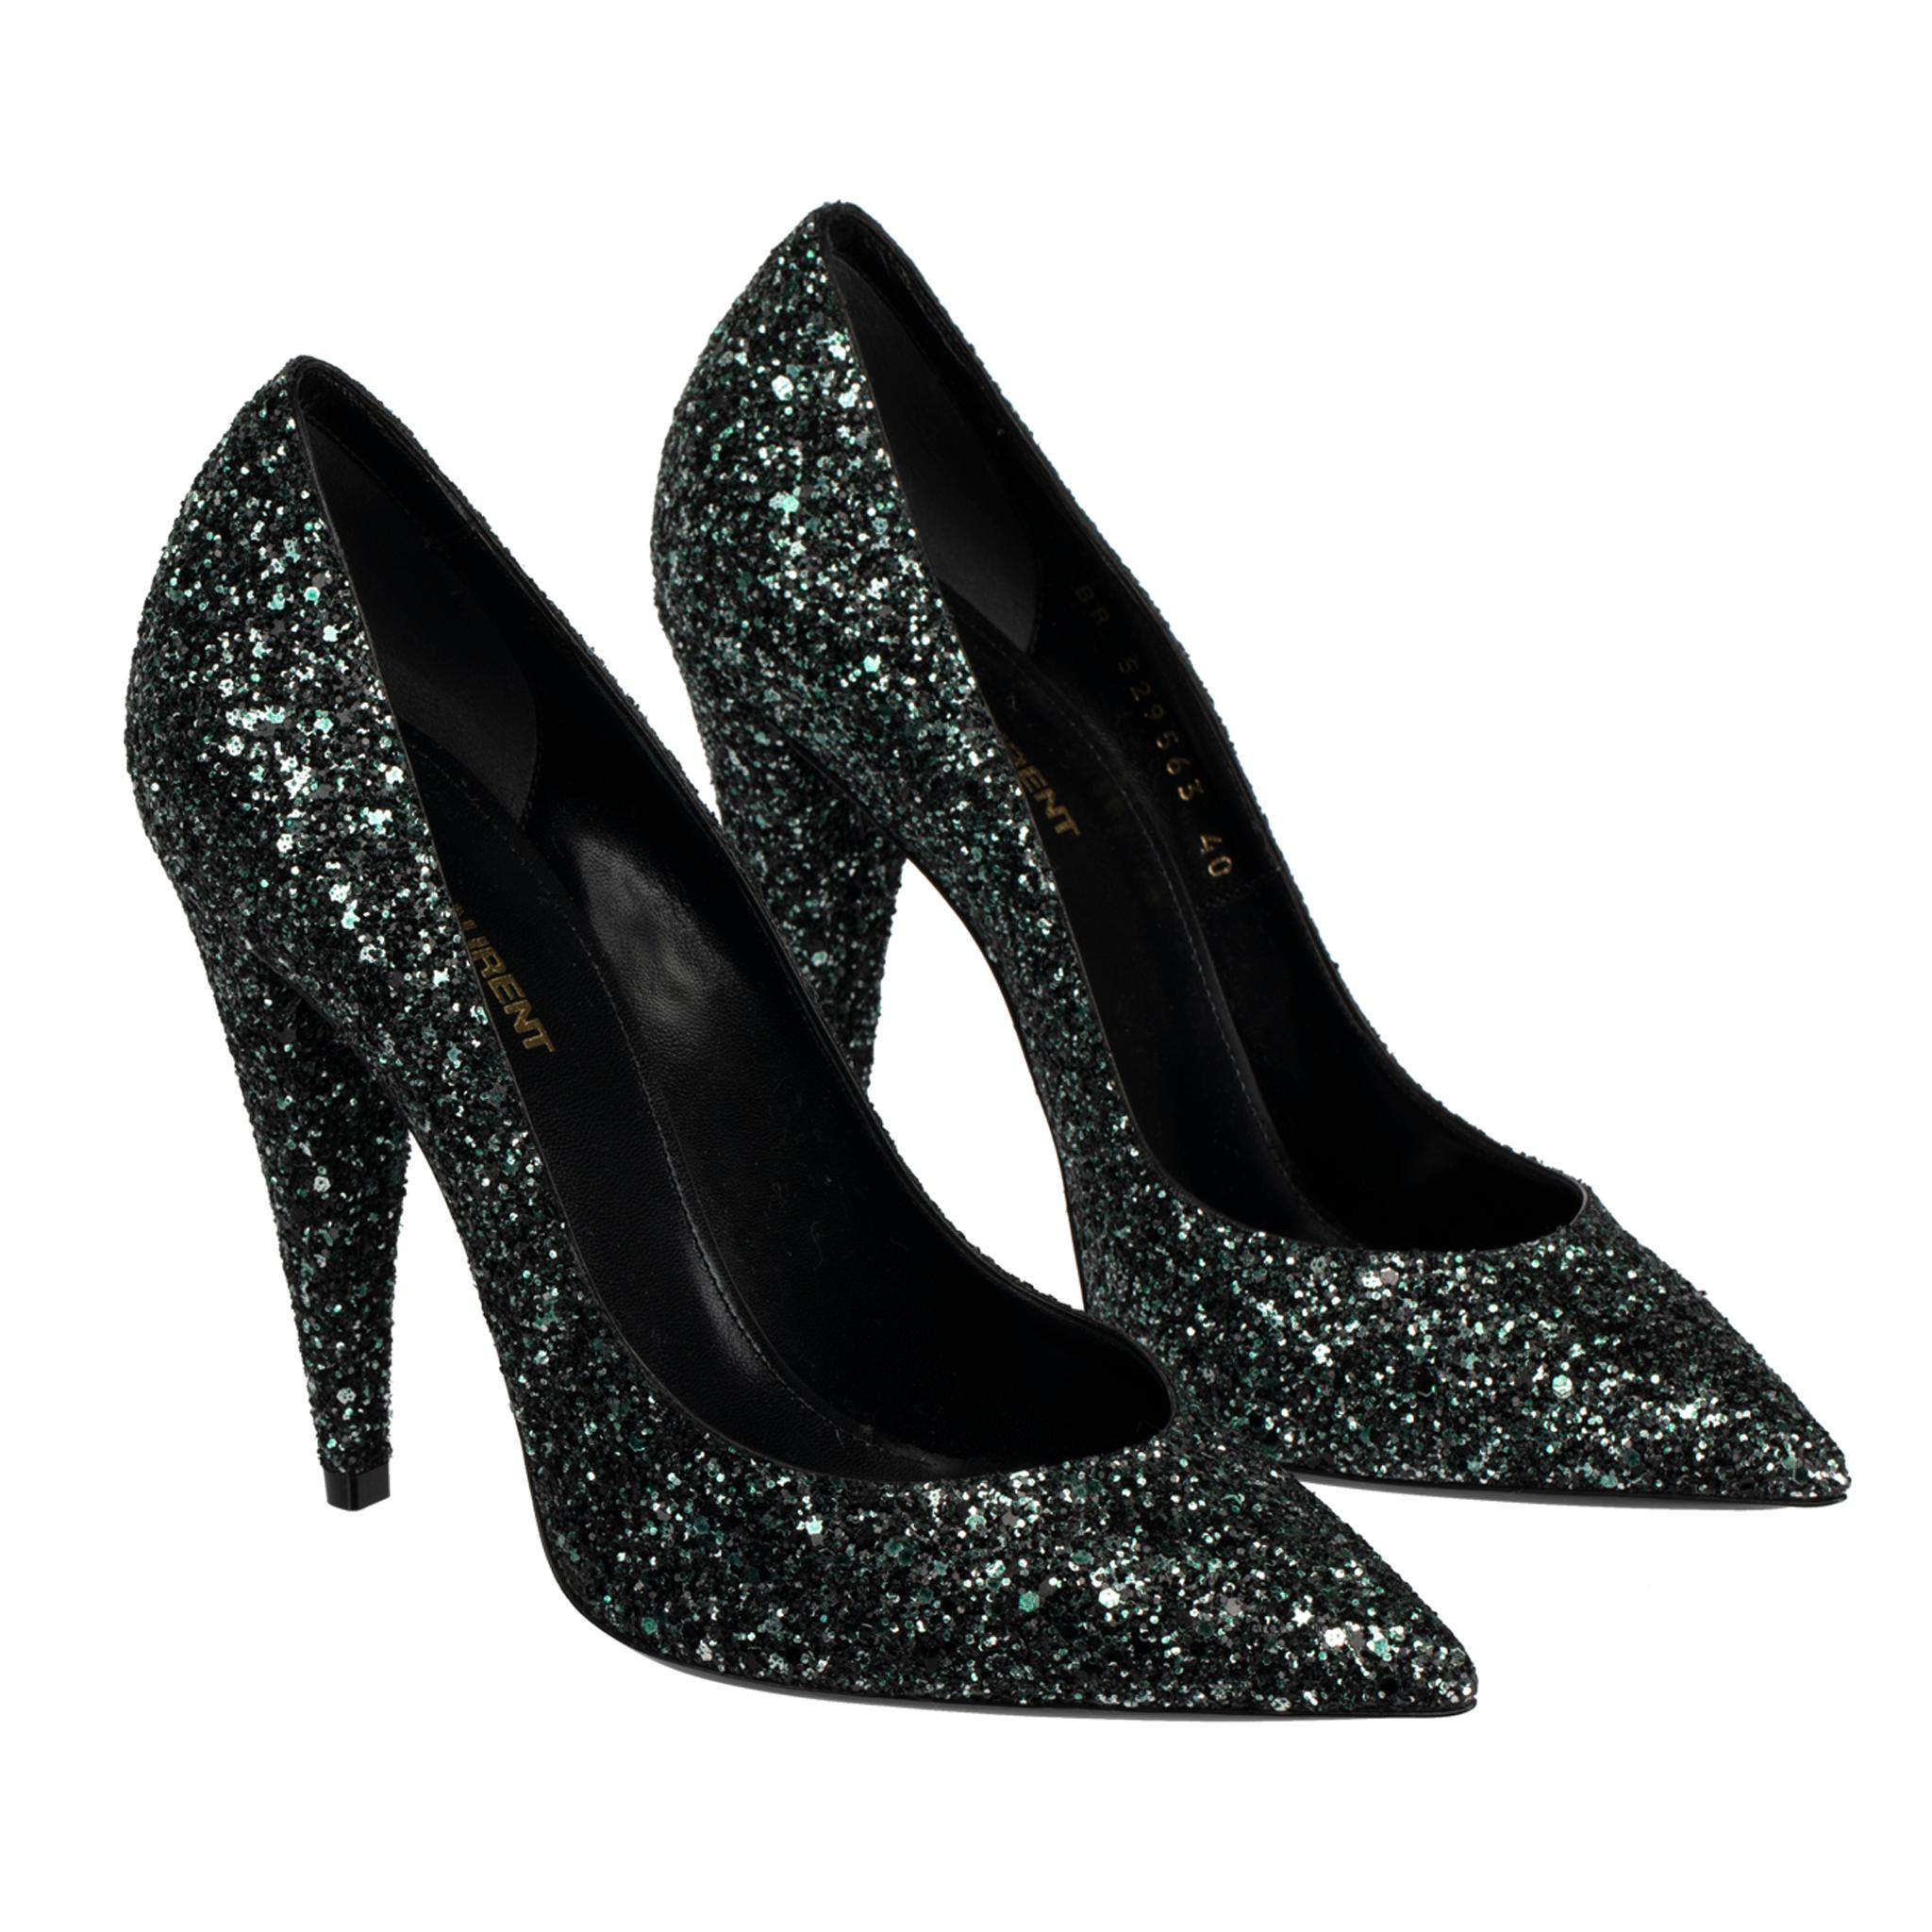 Yves Saint Laurent Decollete Era Black & Emerald Green Glitter Pumps 40 FR In New Condition For Sale In DOUBLE BAY, NSW